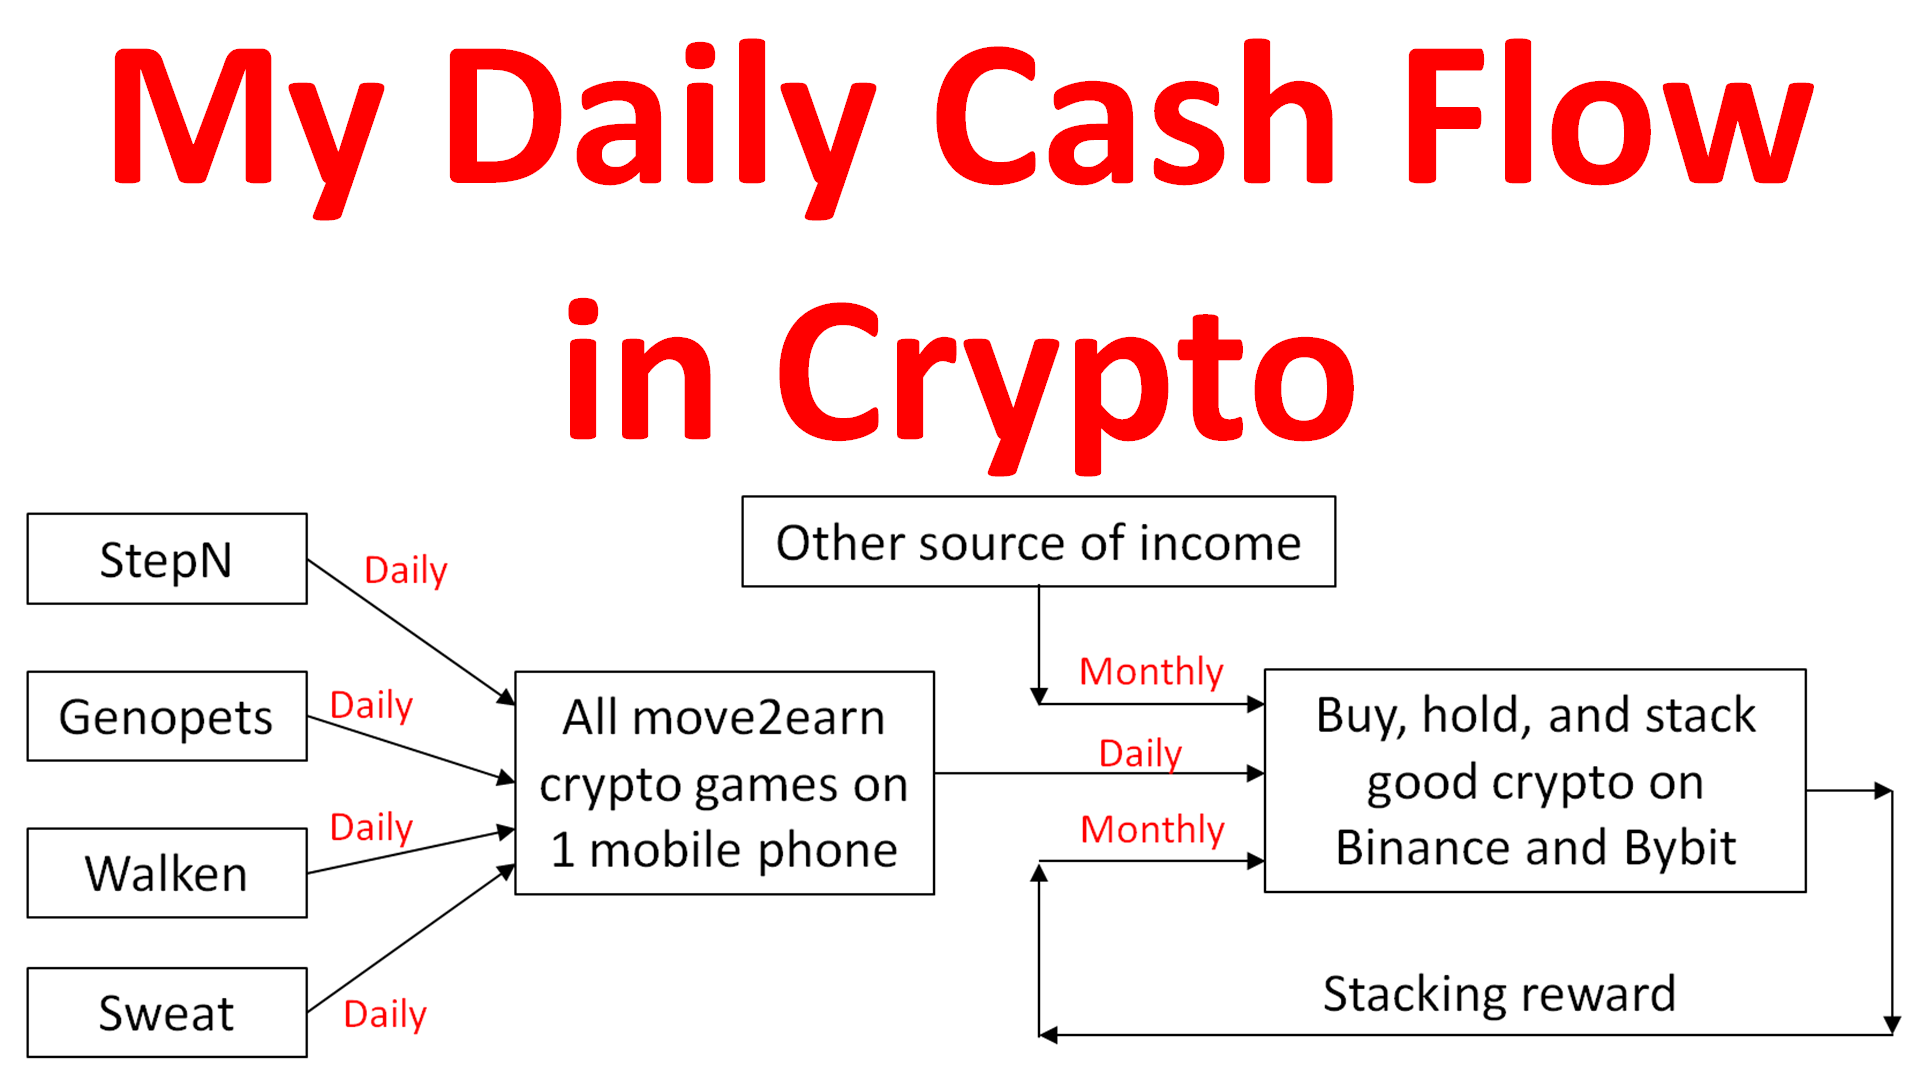 My Daily Cash Flow in Crypto